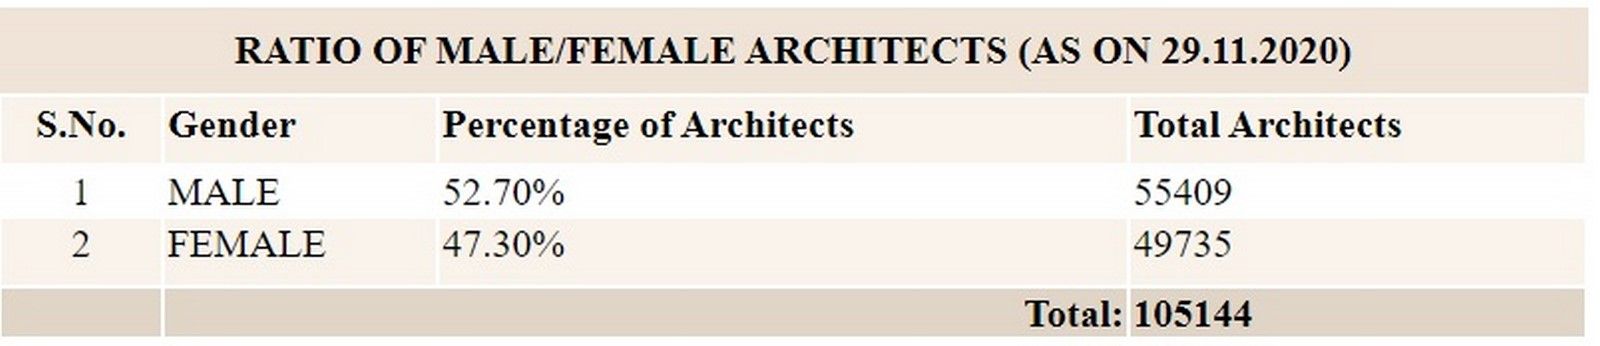 Percentage of male and female architects in India in the year 2020